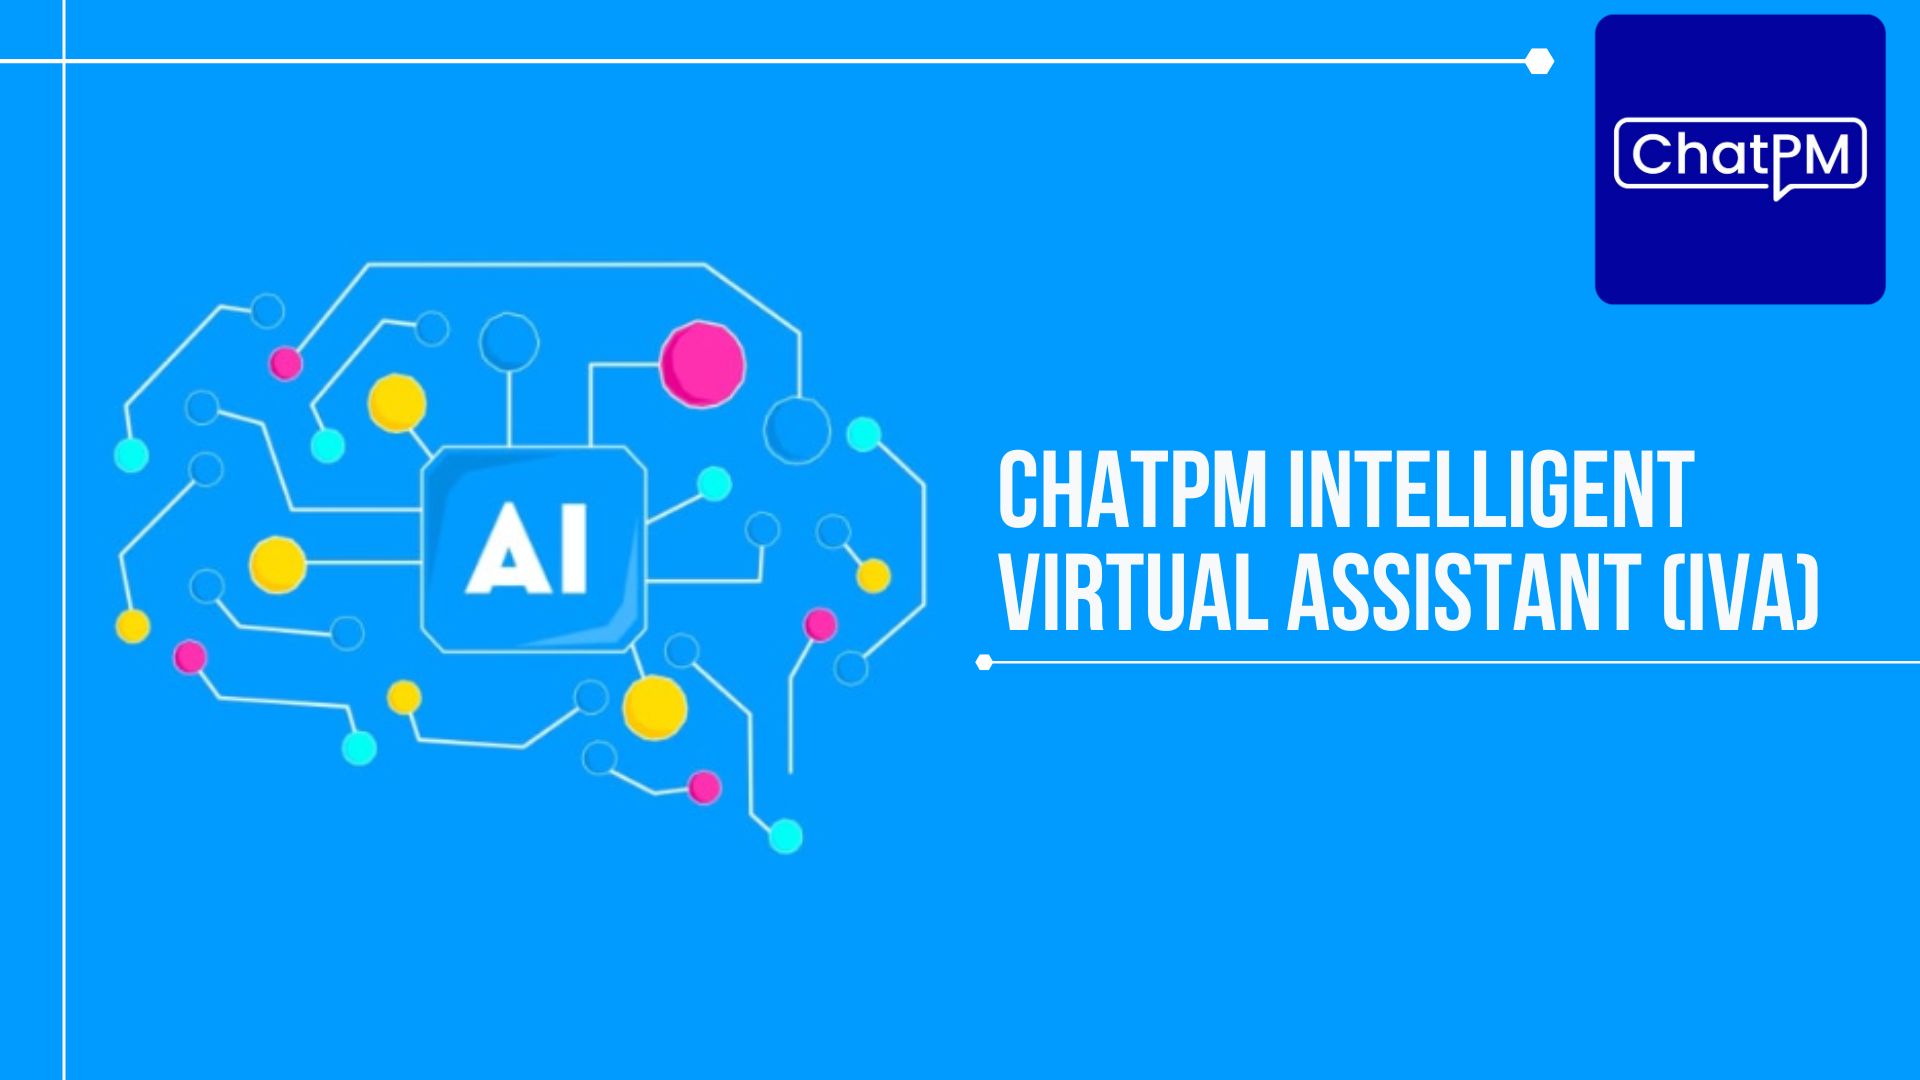 How does Intelligent Virtual Assistant impact our lives?